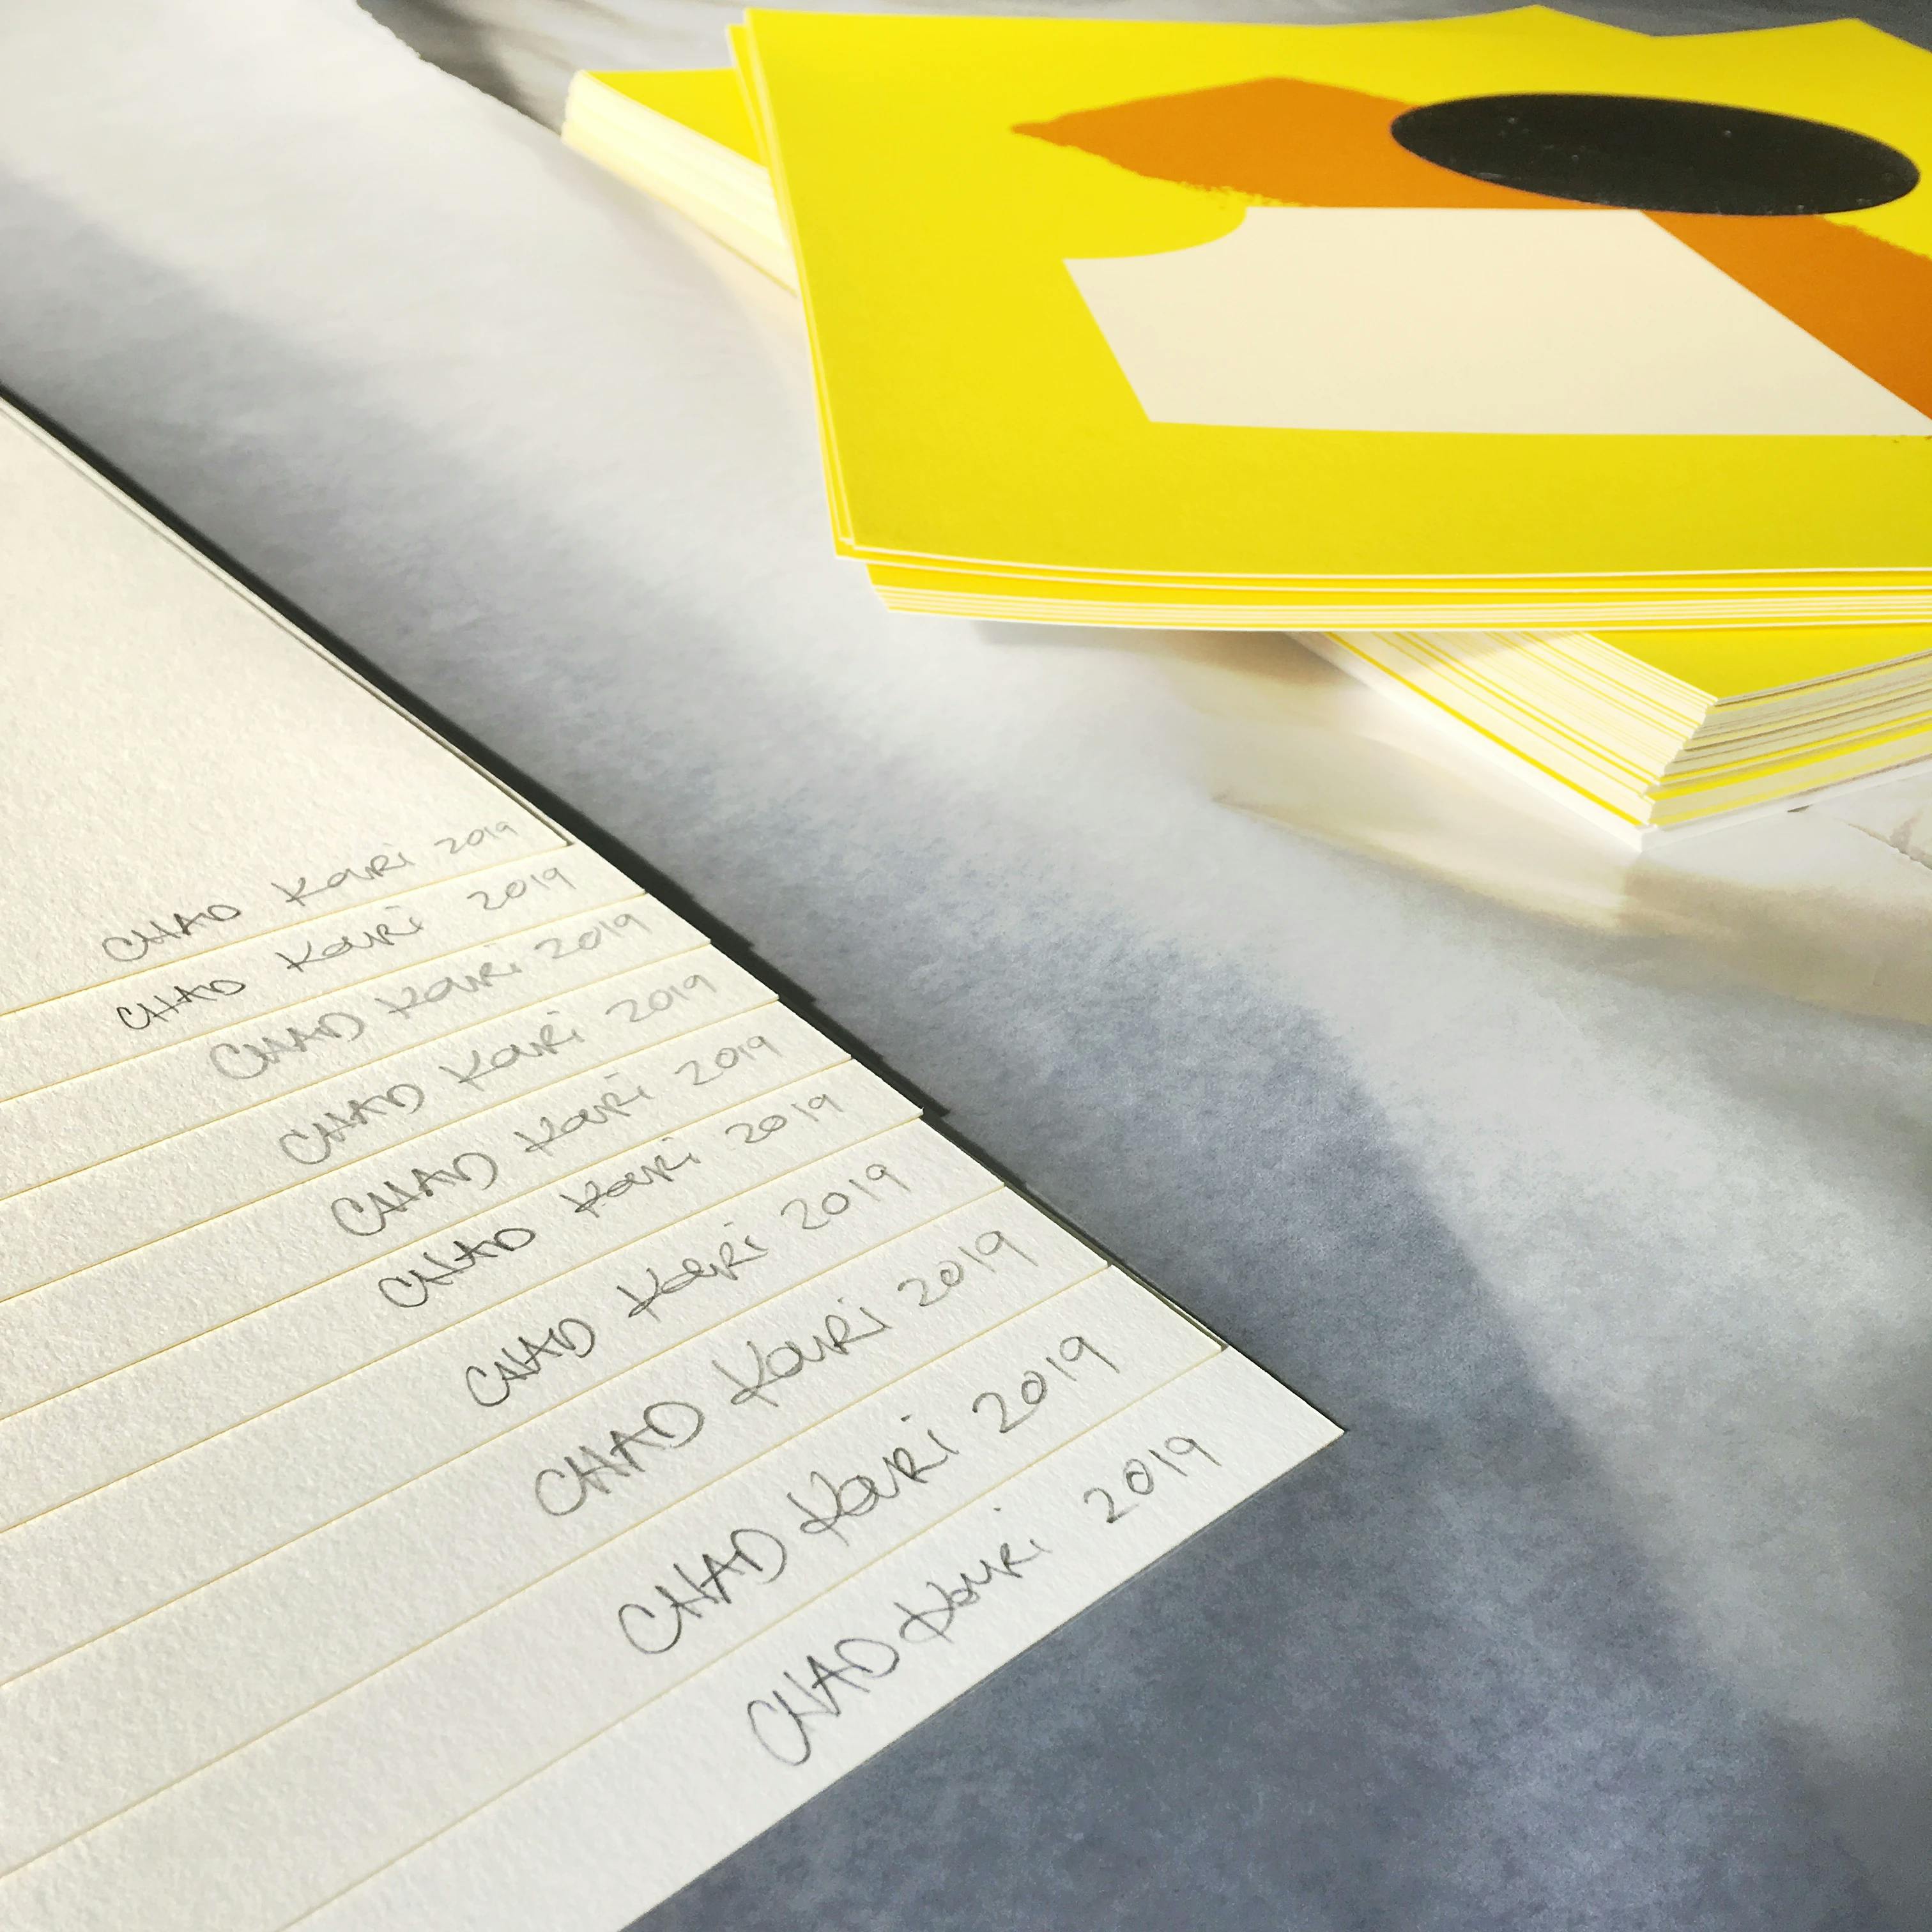 The back of Chad Kouri's print Opportunity for Reflection (Yellow) with artist signatures.